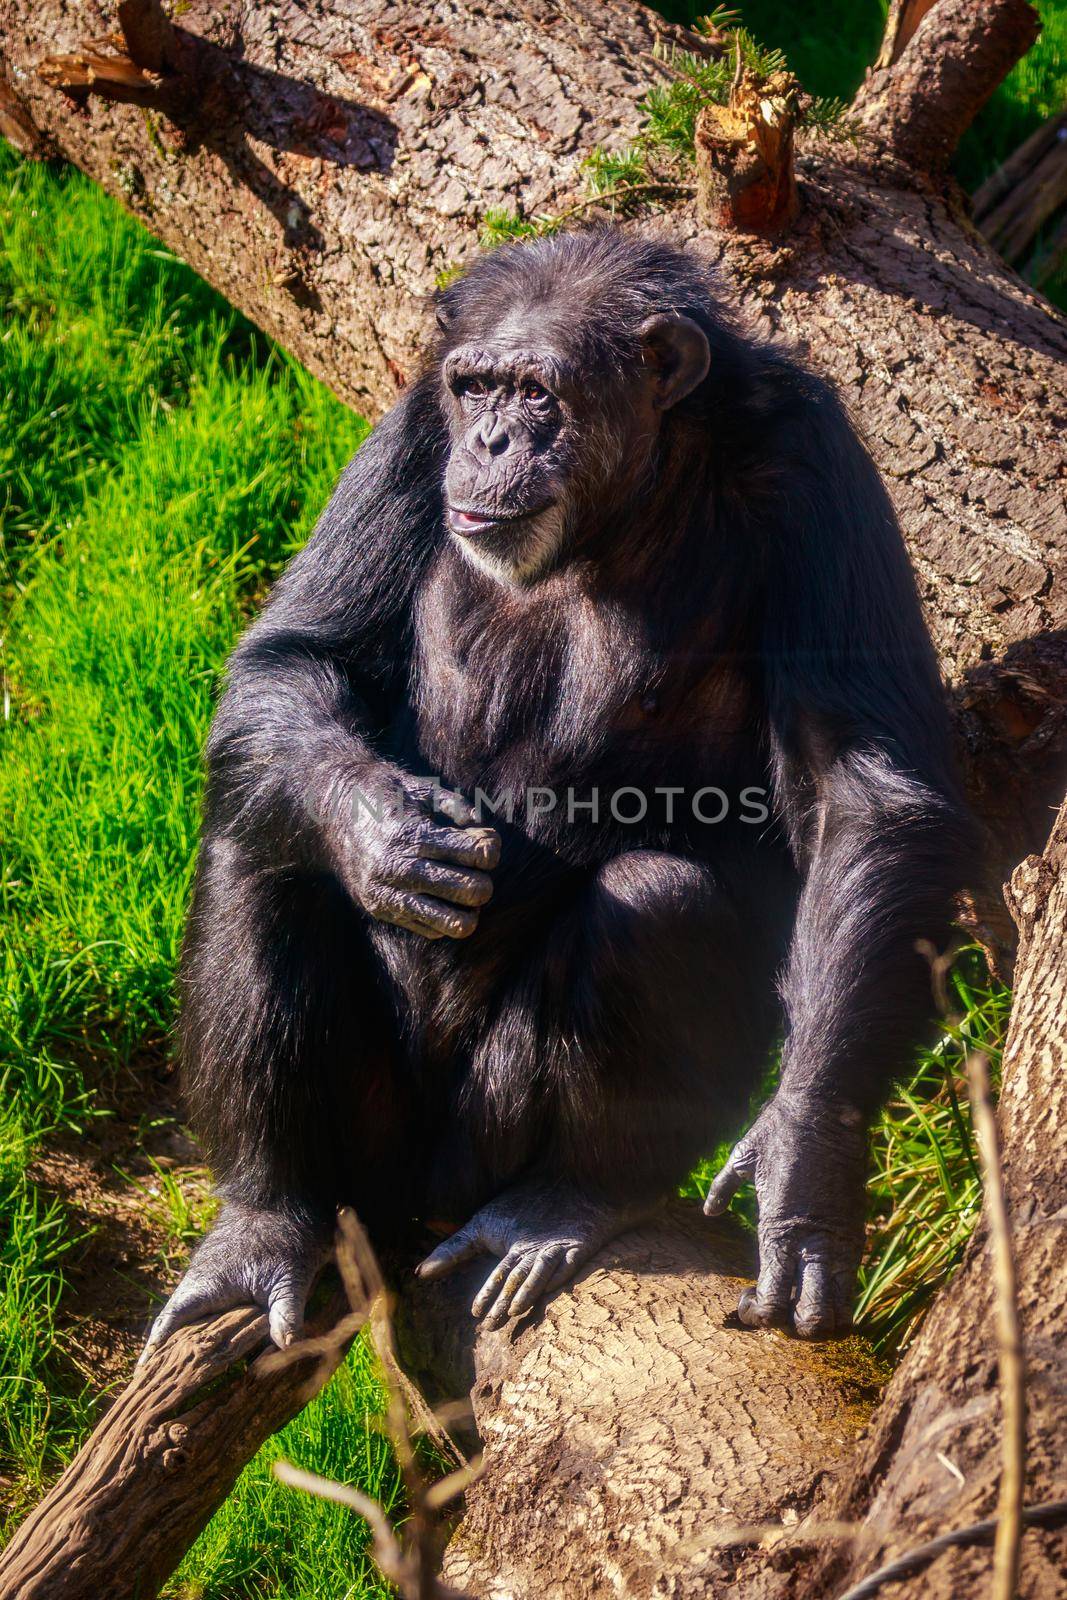 A really old chimpanzee sits on the ground, resting.